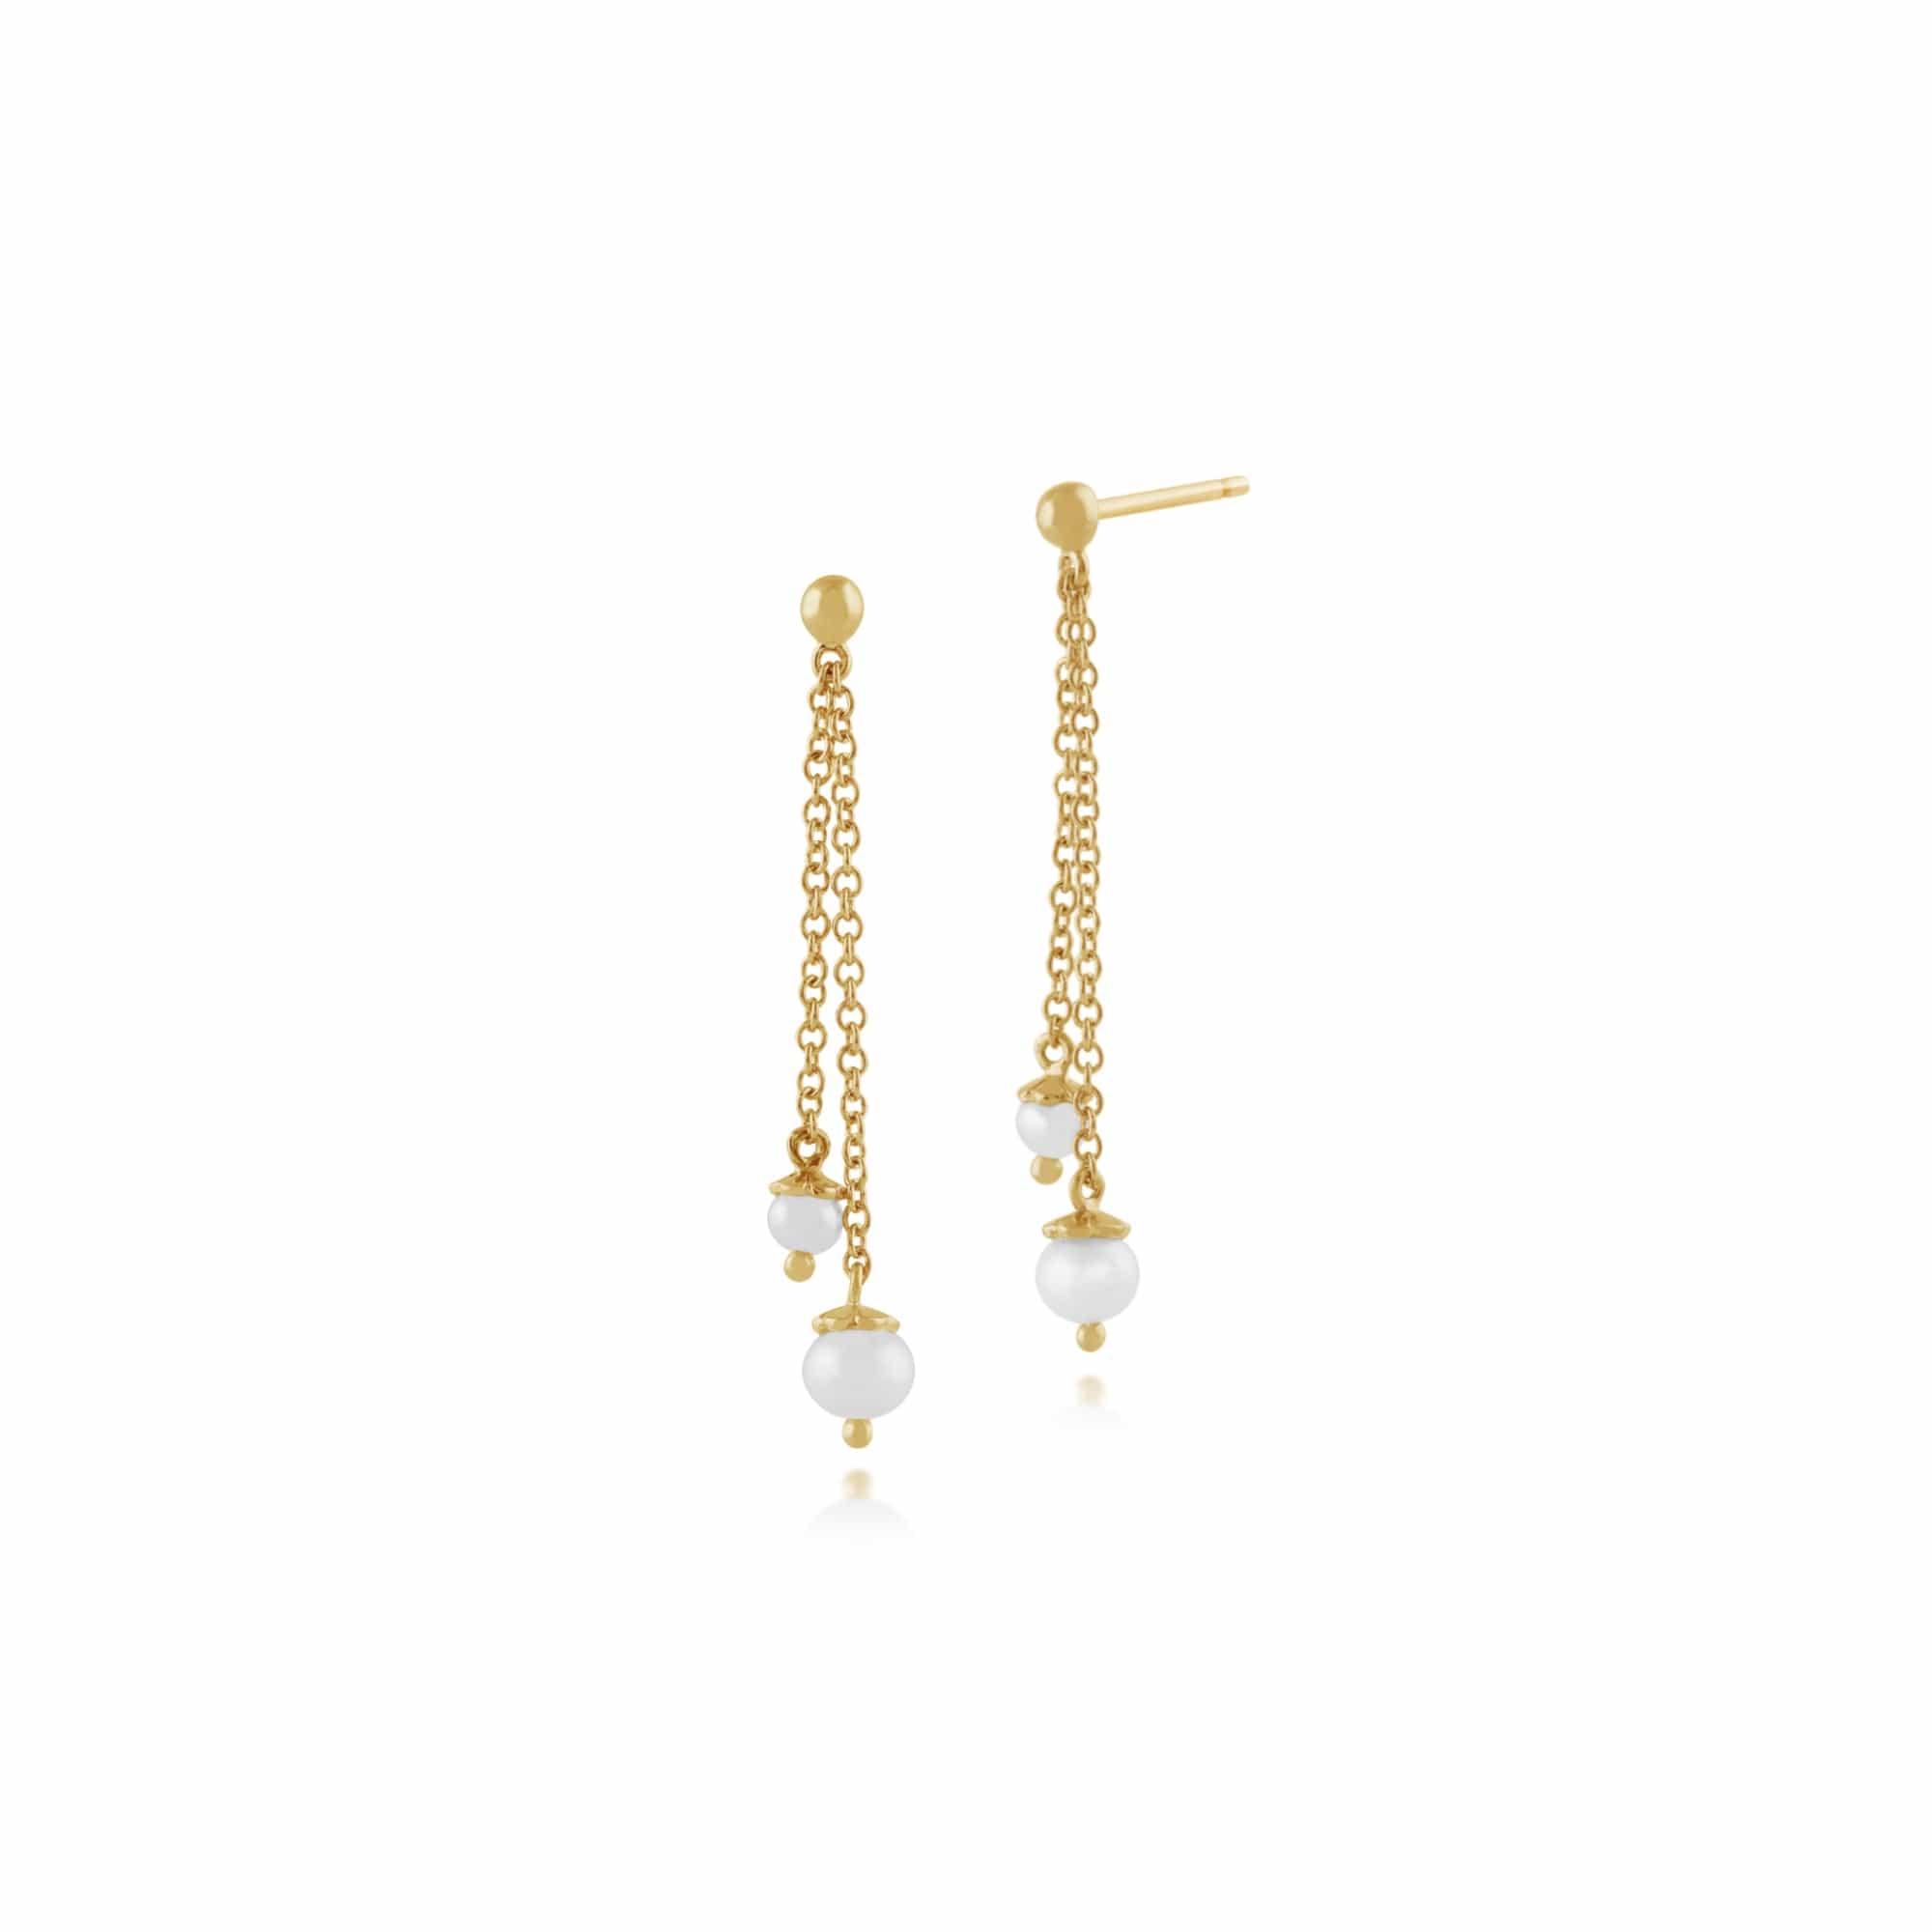 Gemondo 925 Gold Plated Sterling Silver 1.40ct Freshwater Pearl Drop Earrings Image